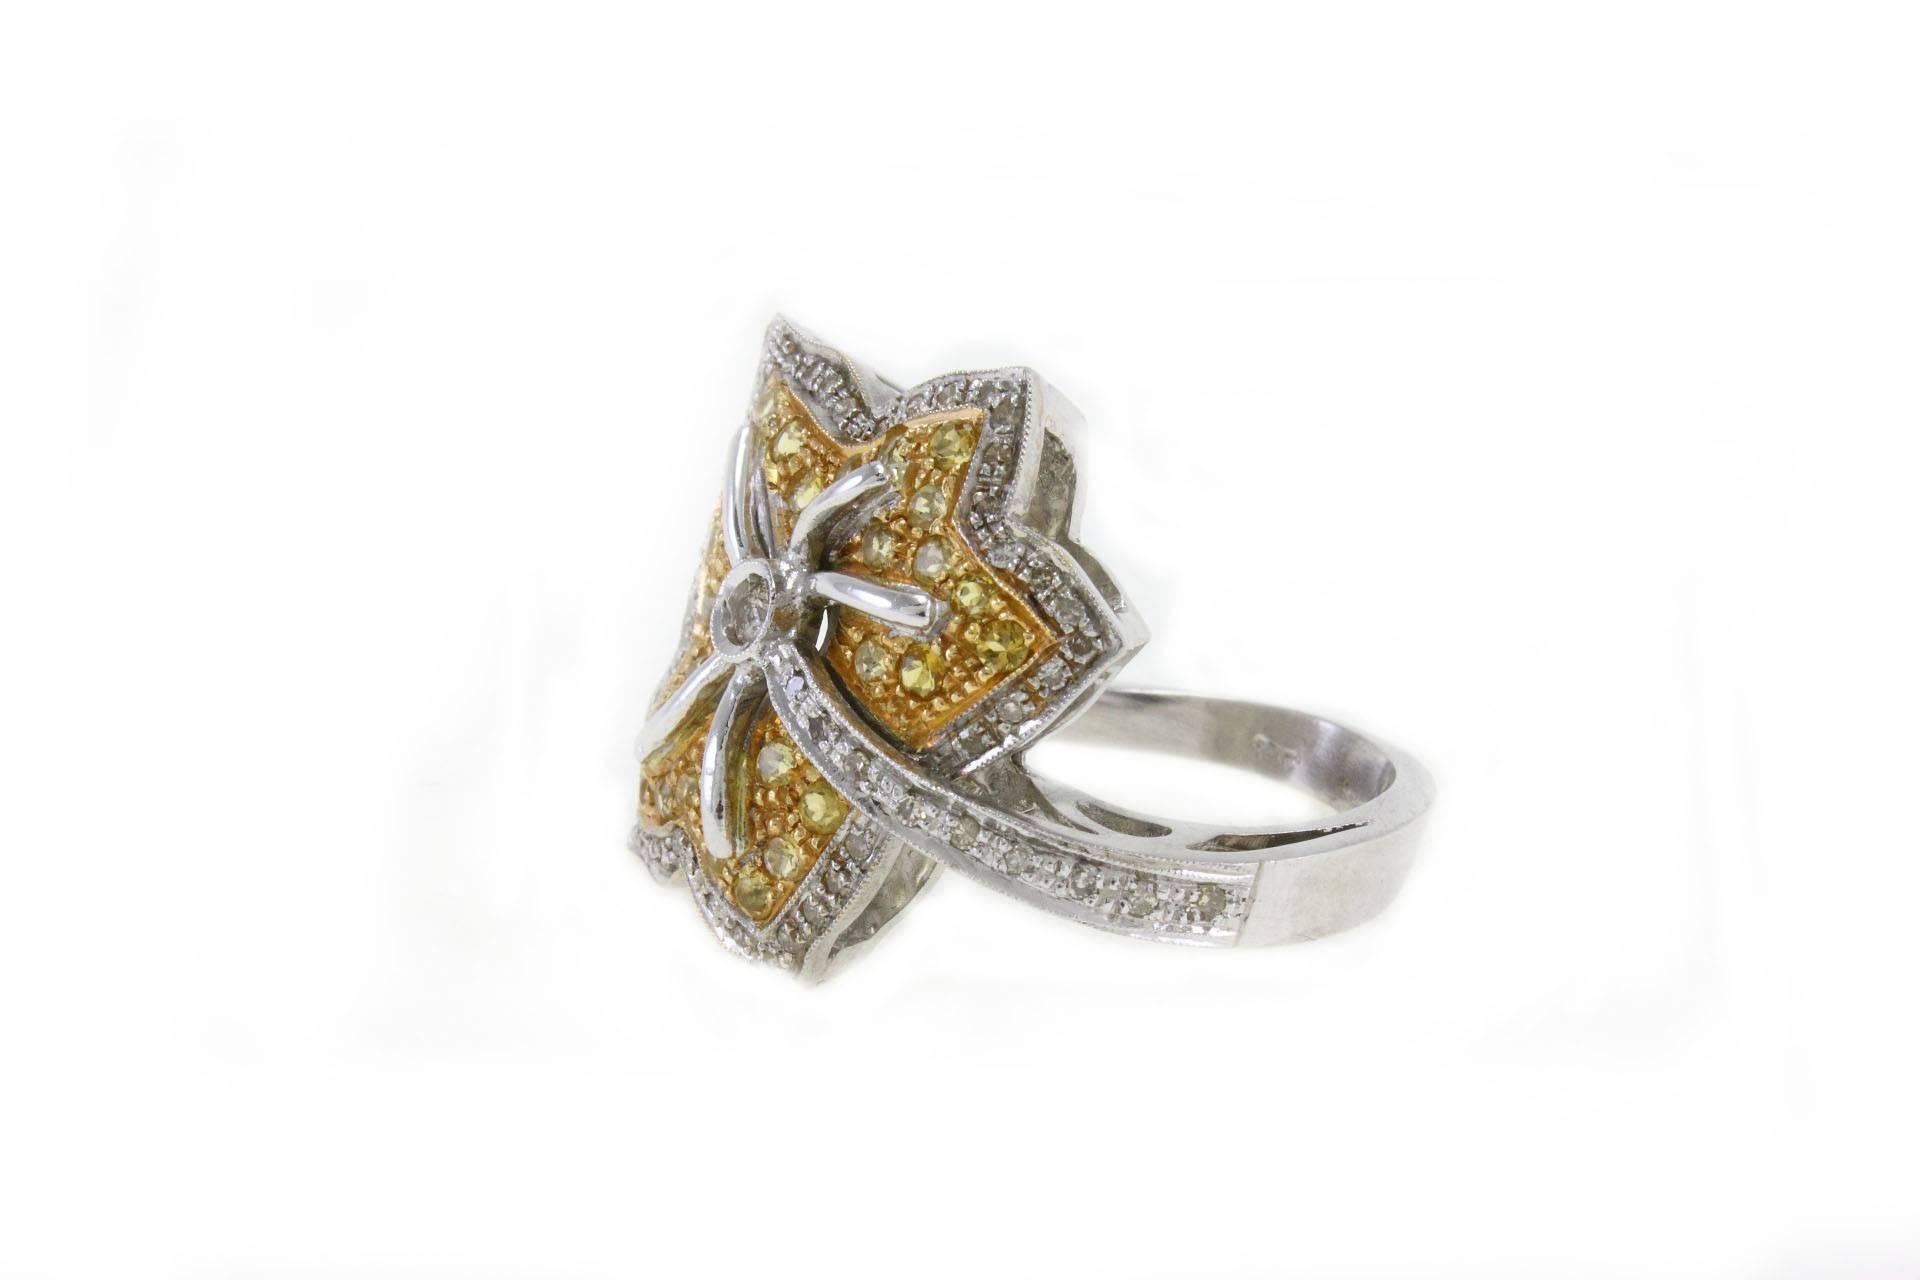 Shiny leaf shaped ring in 14kt yellow and white gold coveder in diamonds and topazes. 

diamonds 0.53kt
topazes 1.08kt
tot weight 14.0gr
US Size
Width 1.15 inches
Lenght 0.99 inches
Diameter 0.74 inches
ref,gera
